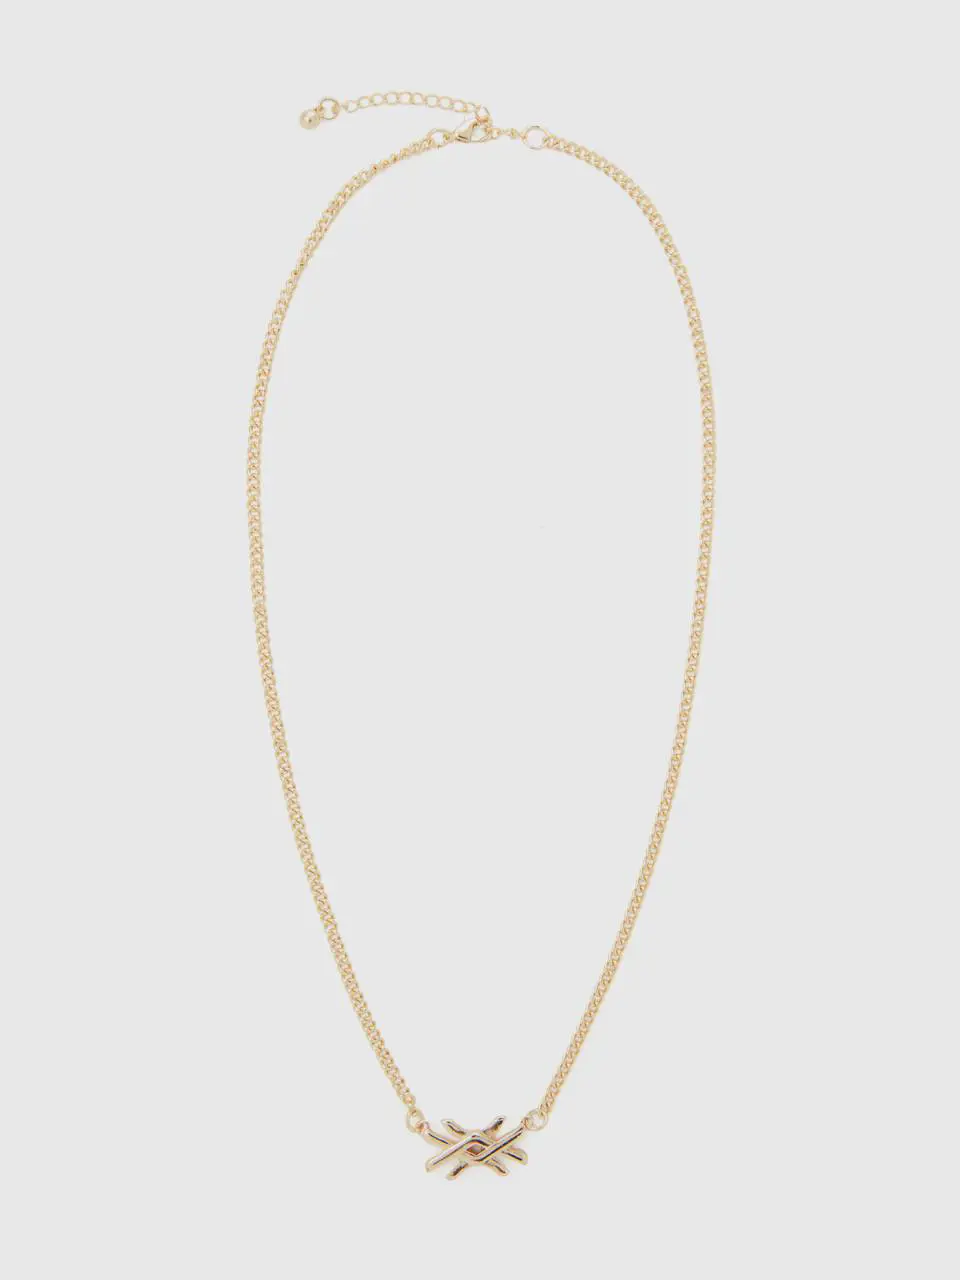 Benetton gold necklace with logo. 1